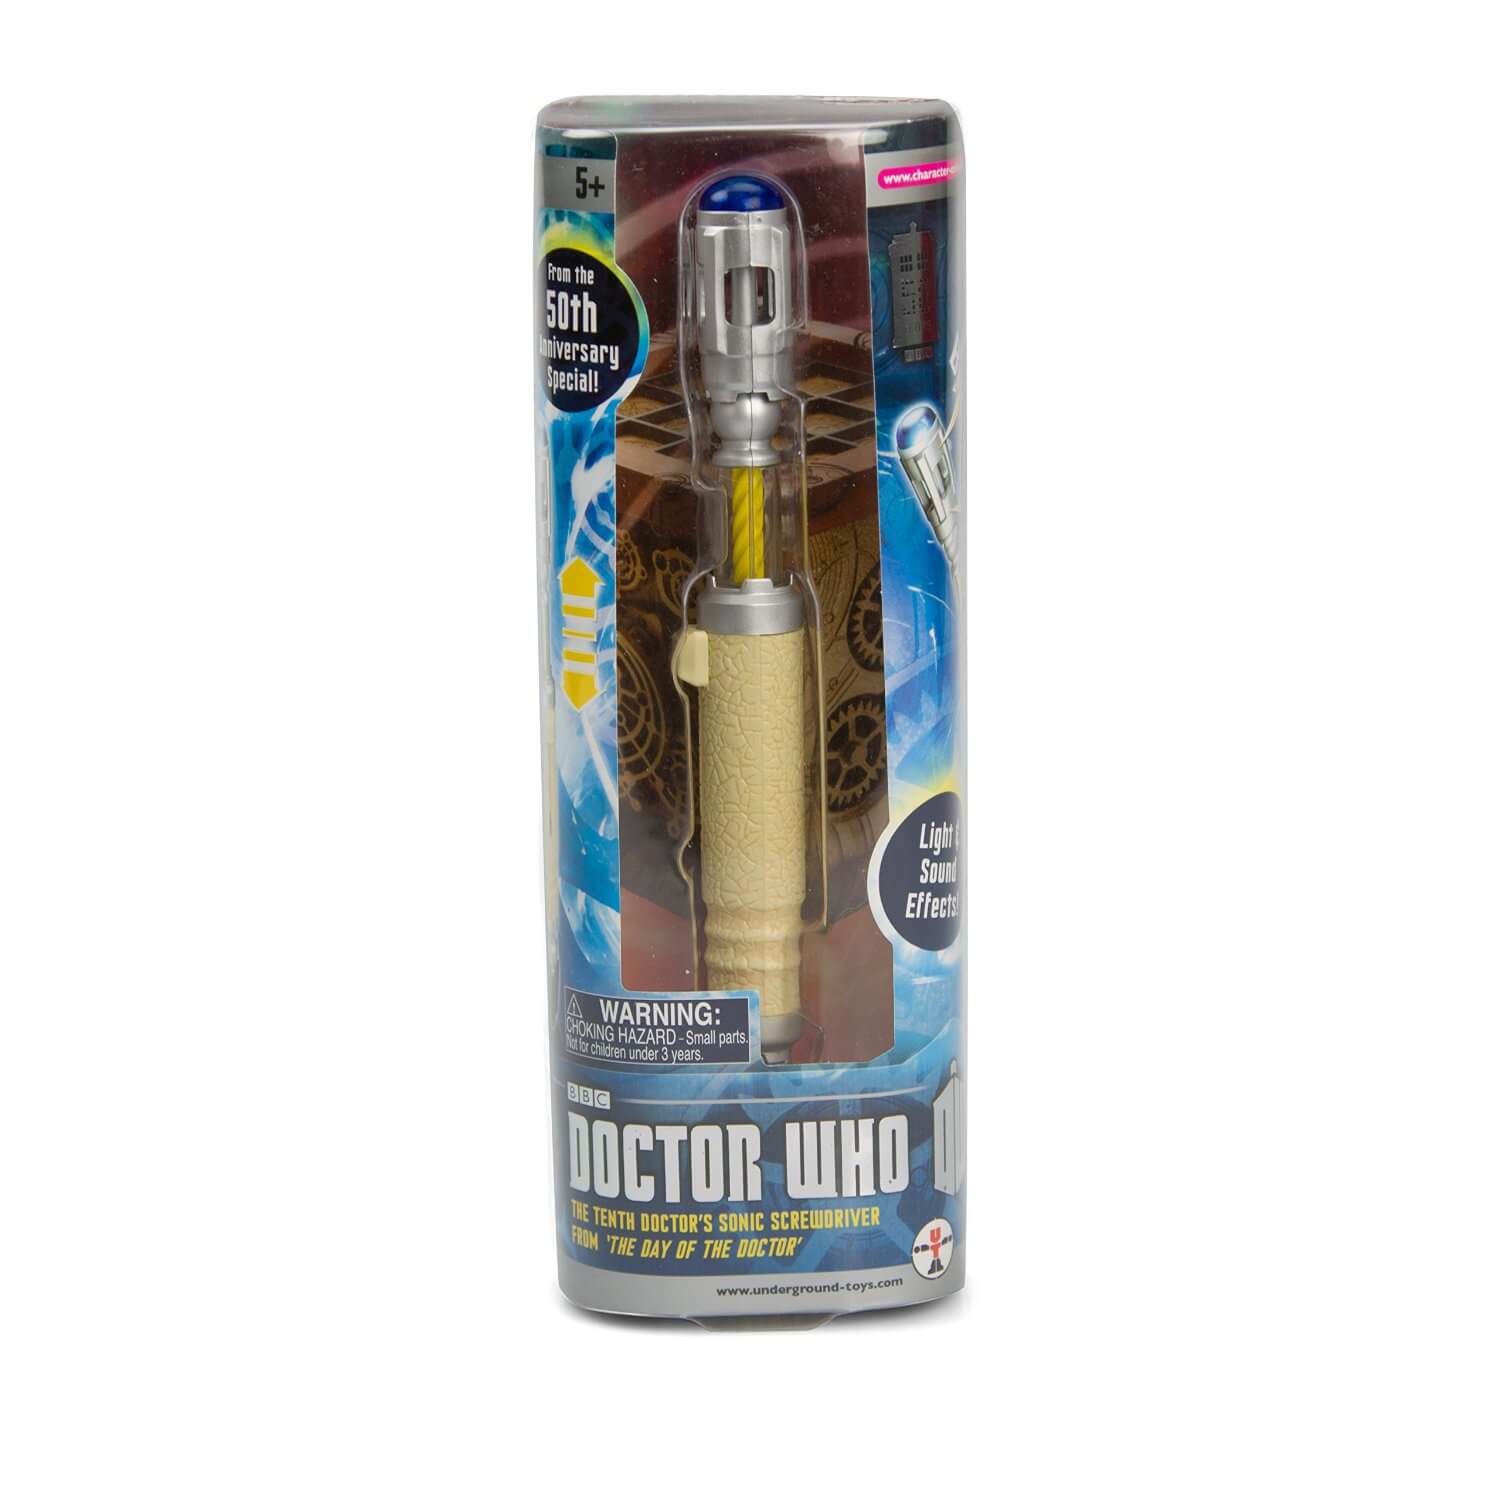 DOCTOR WHO 10th Sonic Screwdriver LED TORCH 1/2 DISPO